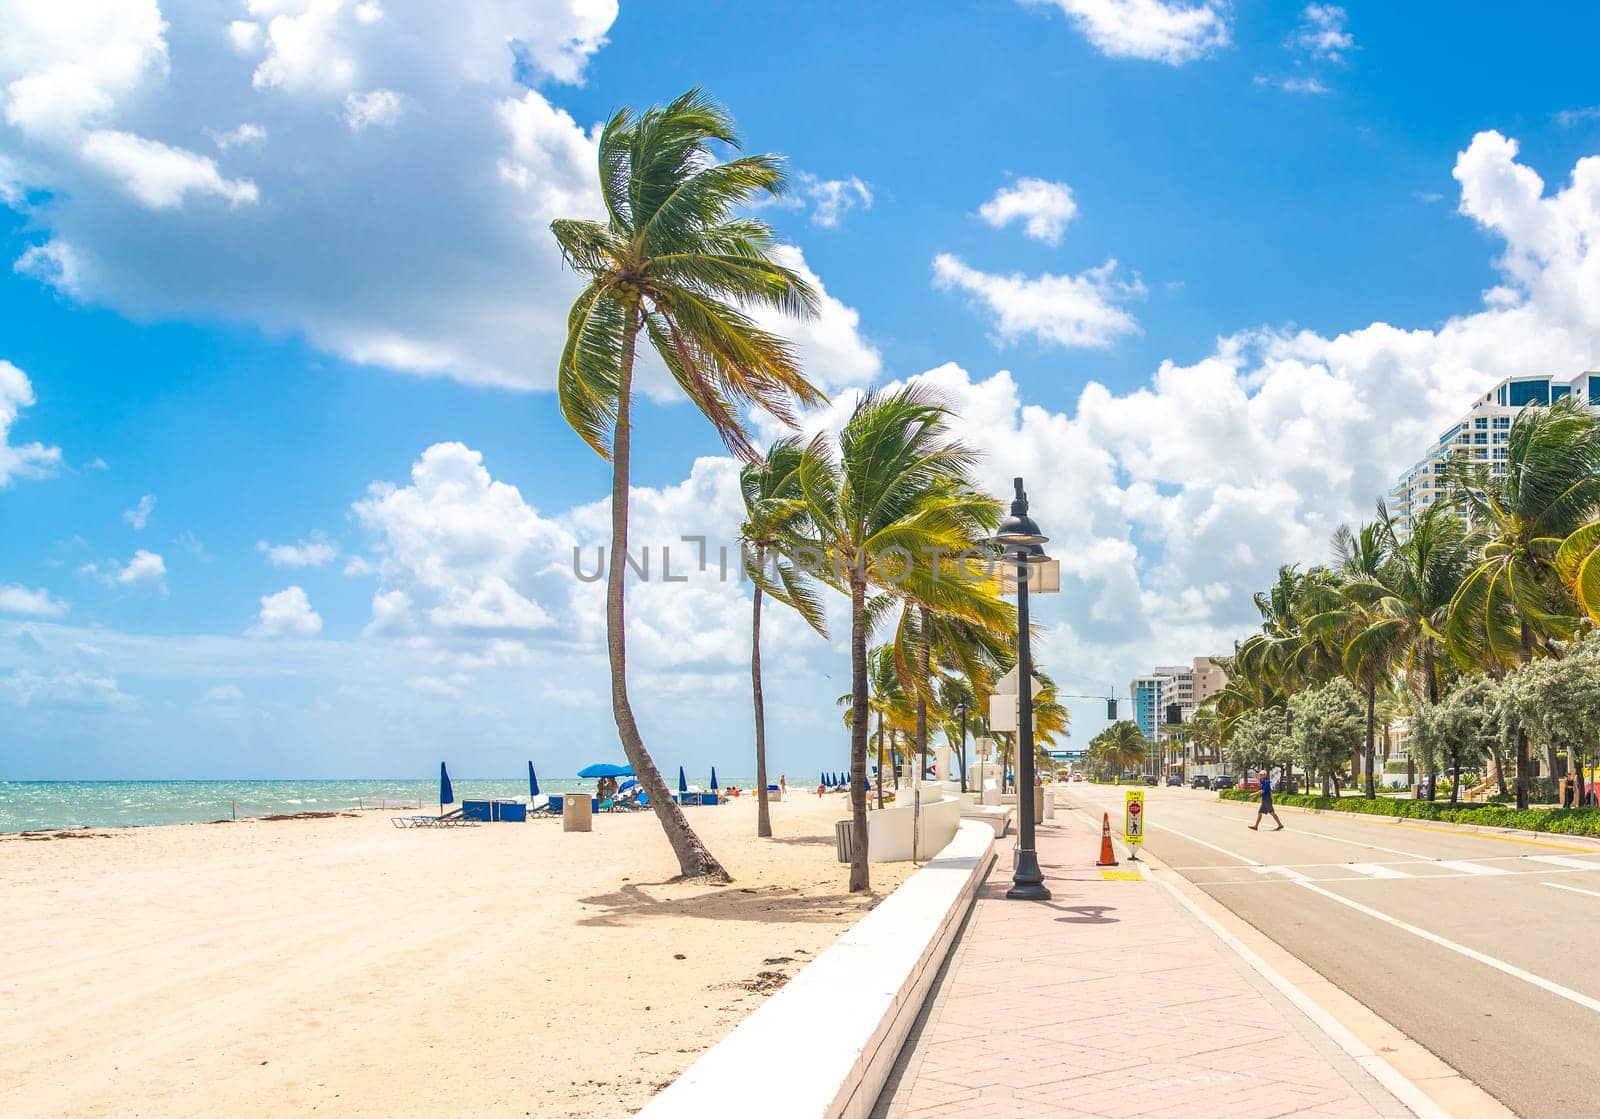 Seafront beach promenade with palm trees